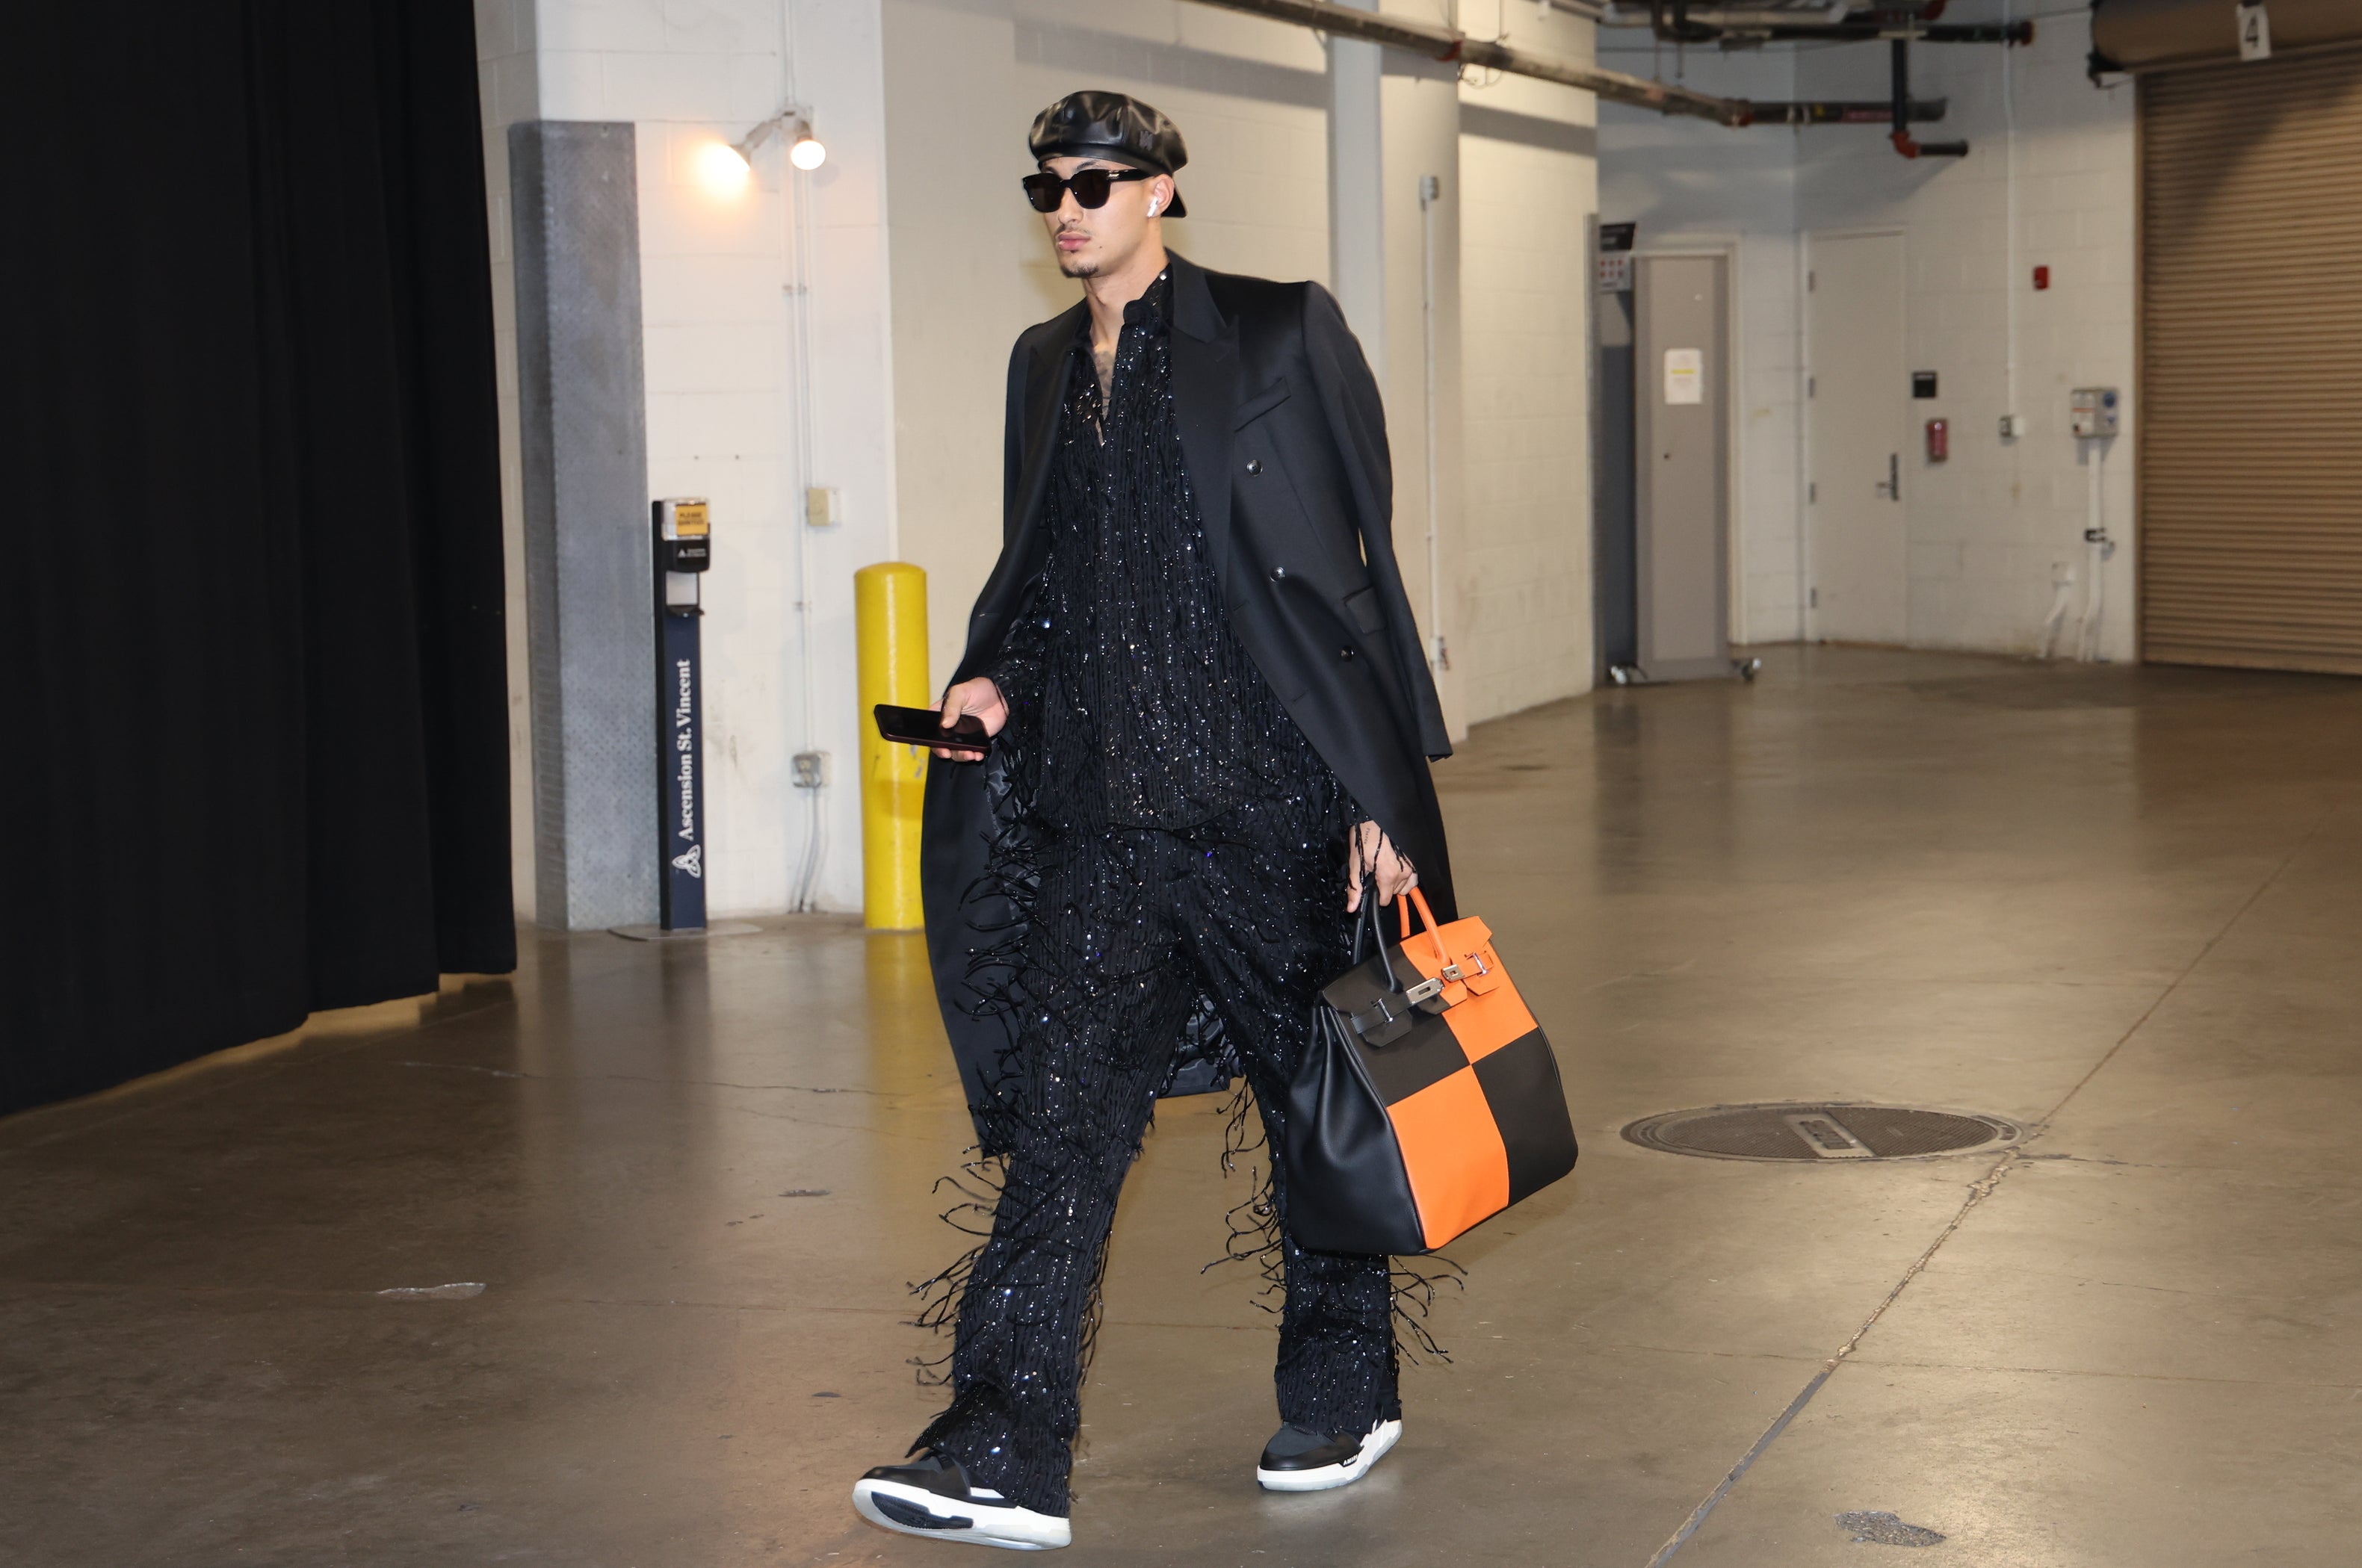 The NBA Tunnel Walk Is Now One of Menswear's Most Influential